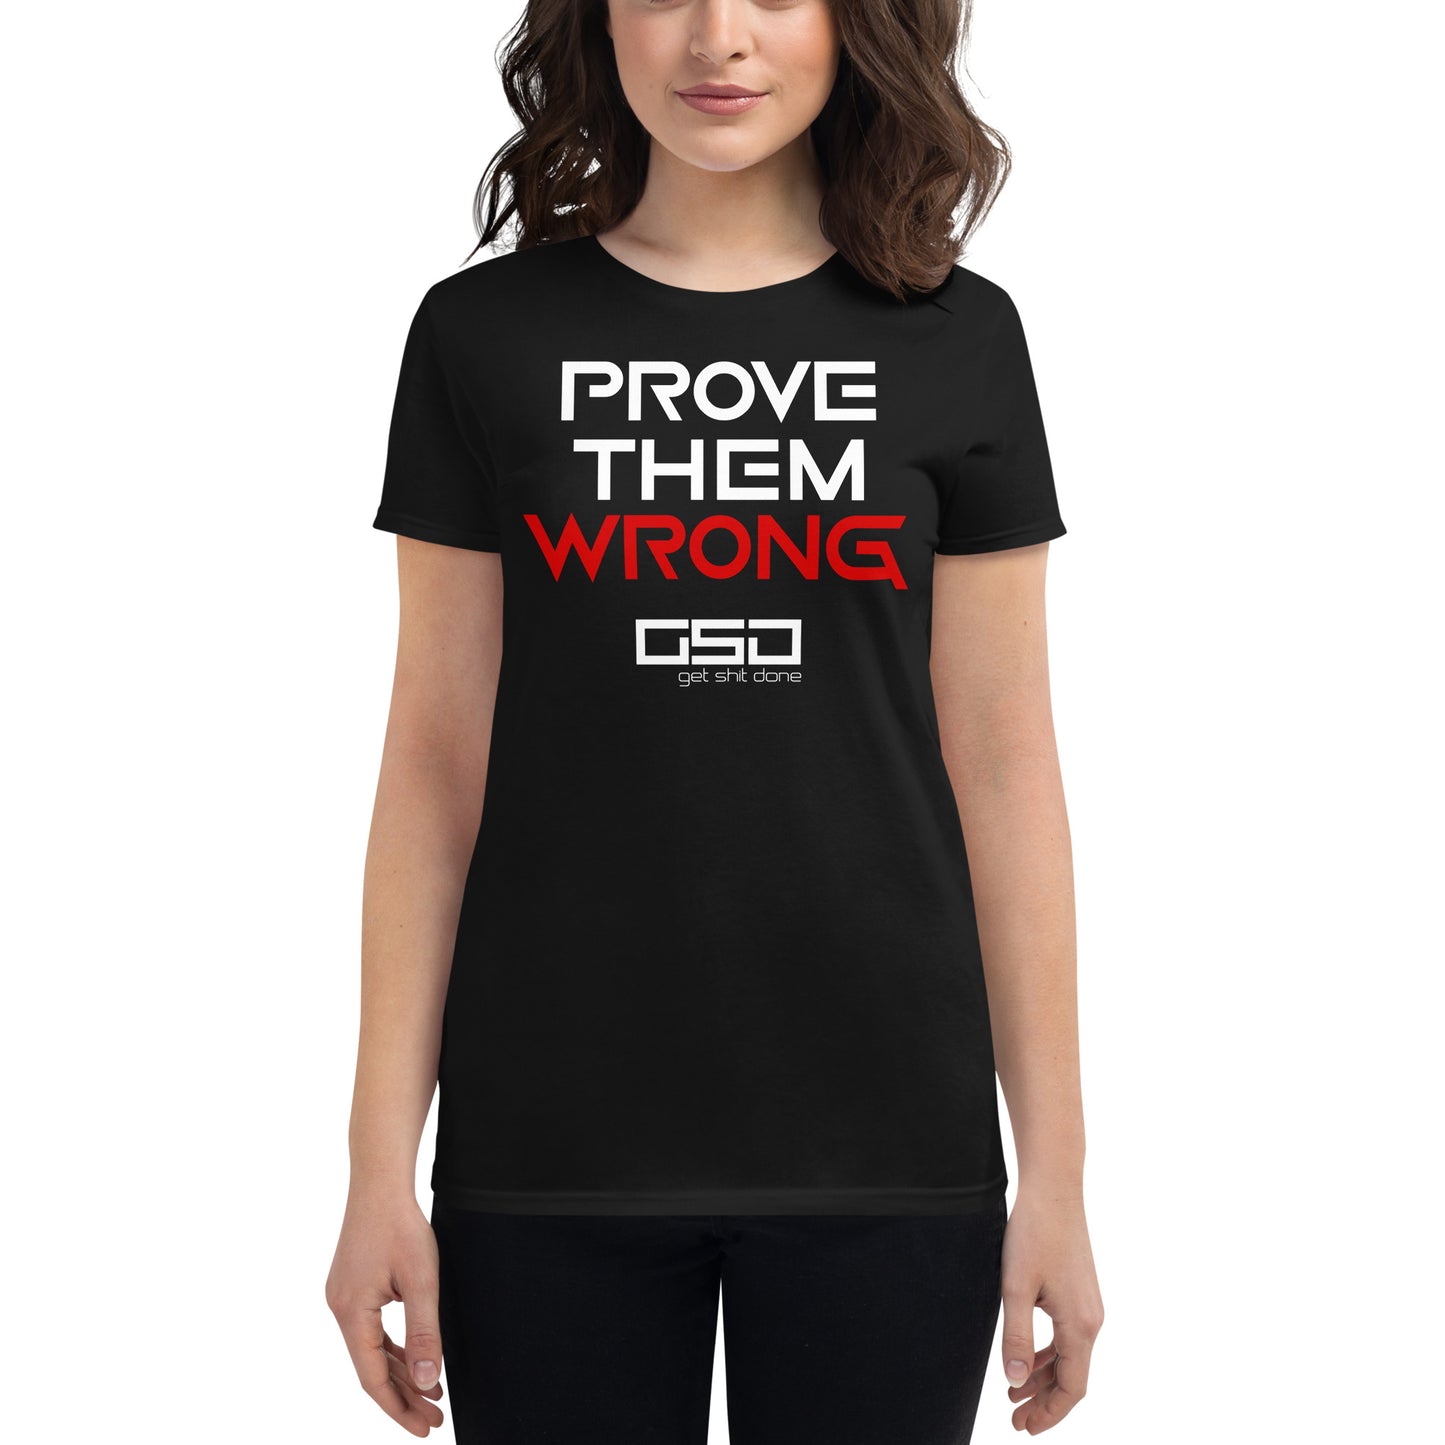 Prove Them Wrong-Women's Tee